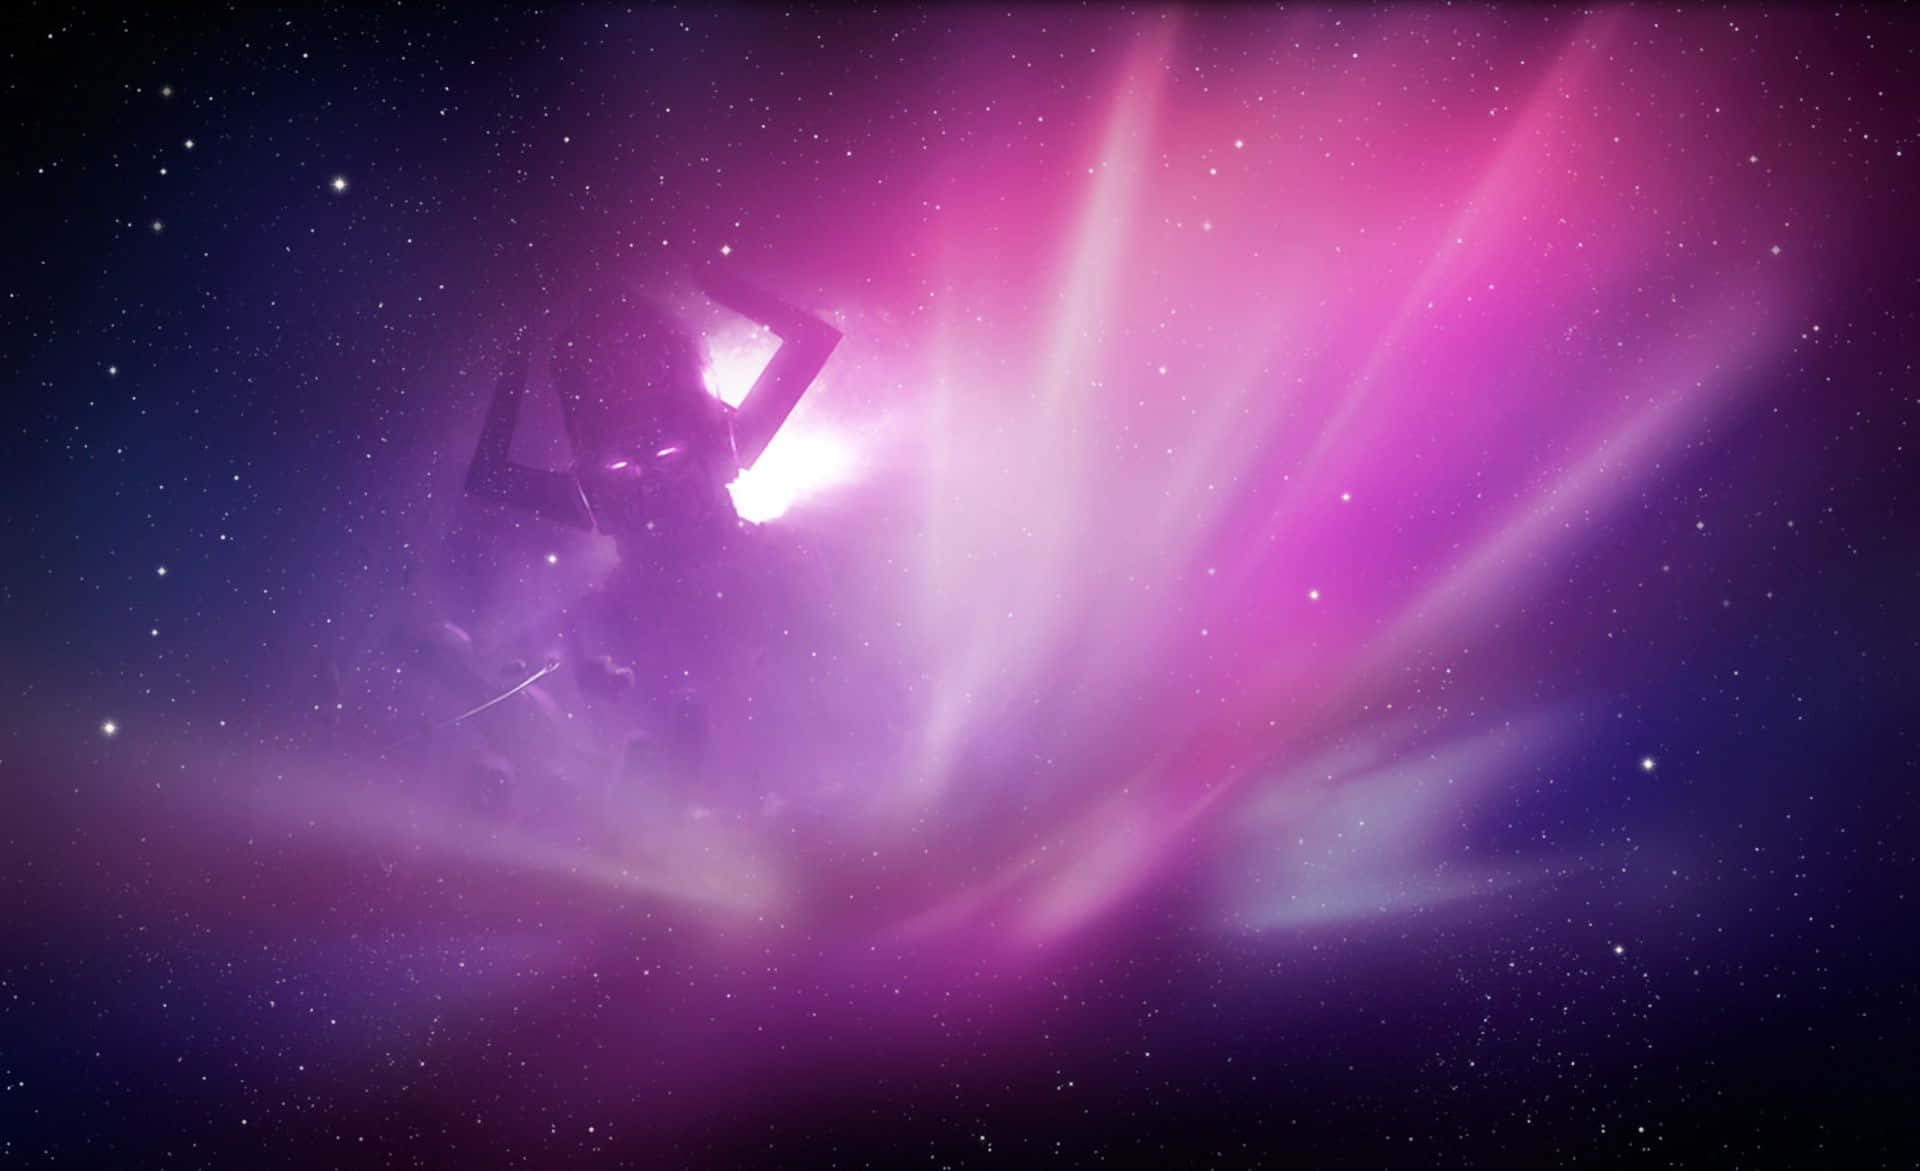 Galactus, the Devourer of Worlds, standing tall in space Wallpaper